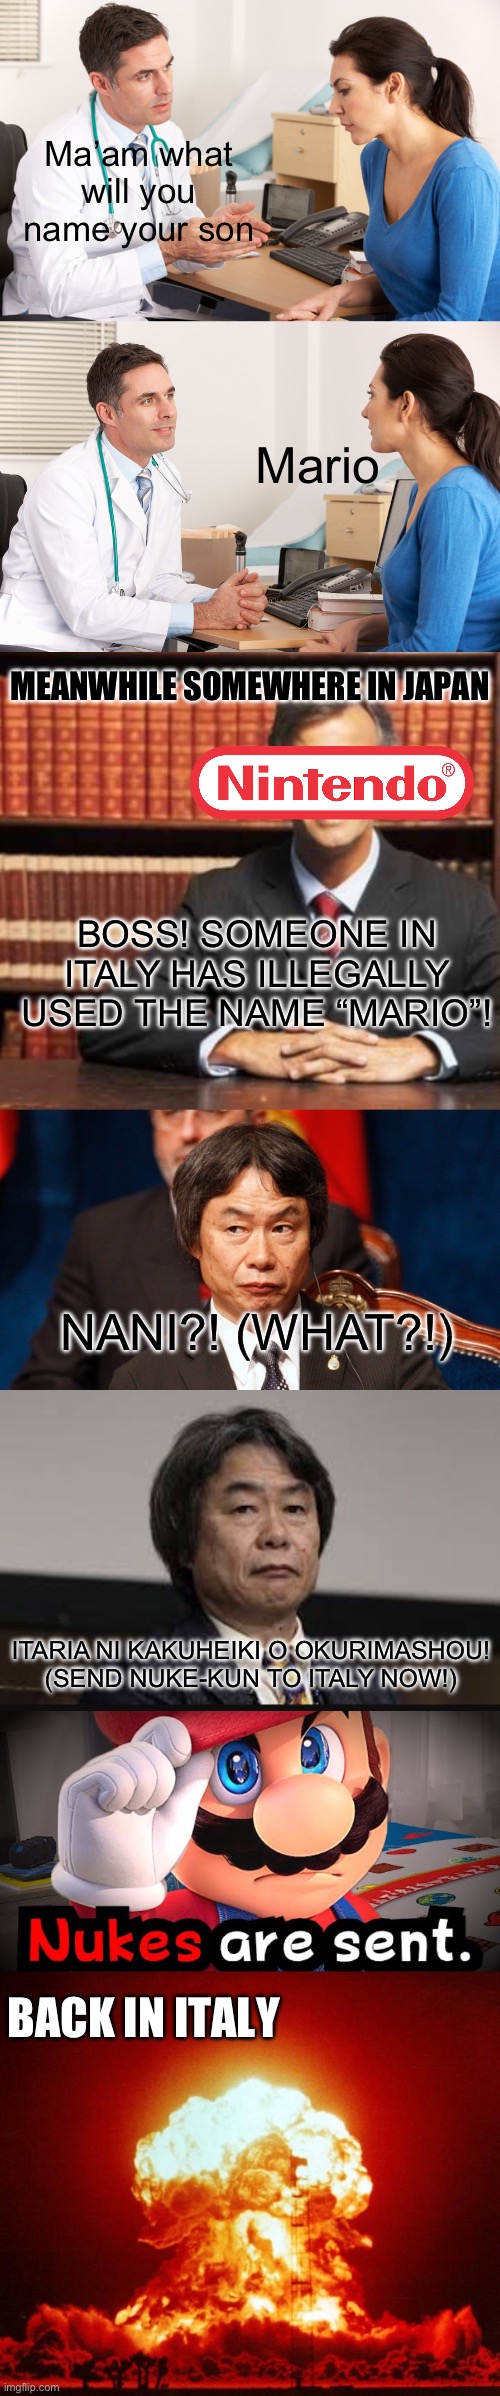 Nintendo after you named your son Mario | Ma’am what will you name your son; Mario; MEANWHILE SOMEWHERE IN JAPAN; BOSS! SOMEONE IN ITALY HAS ILLEGALLY USED THE NAME “MARIO”! NANI?! (WHAT?!); ITARIA NI KAKUHEIKI O OKURIMASHOU! (SEND NUKE-KUN TO ITALY NOW!); BACK IN ITALY | image tagged in doctor talking to patient,lawyer,nuke,mario,nintendo,memes | made w/ Imgflip meme maker